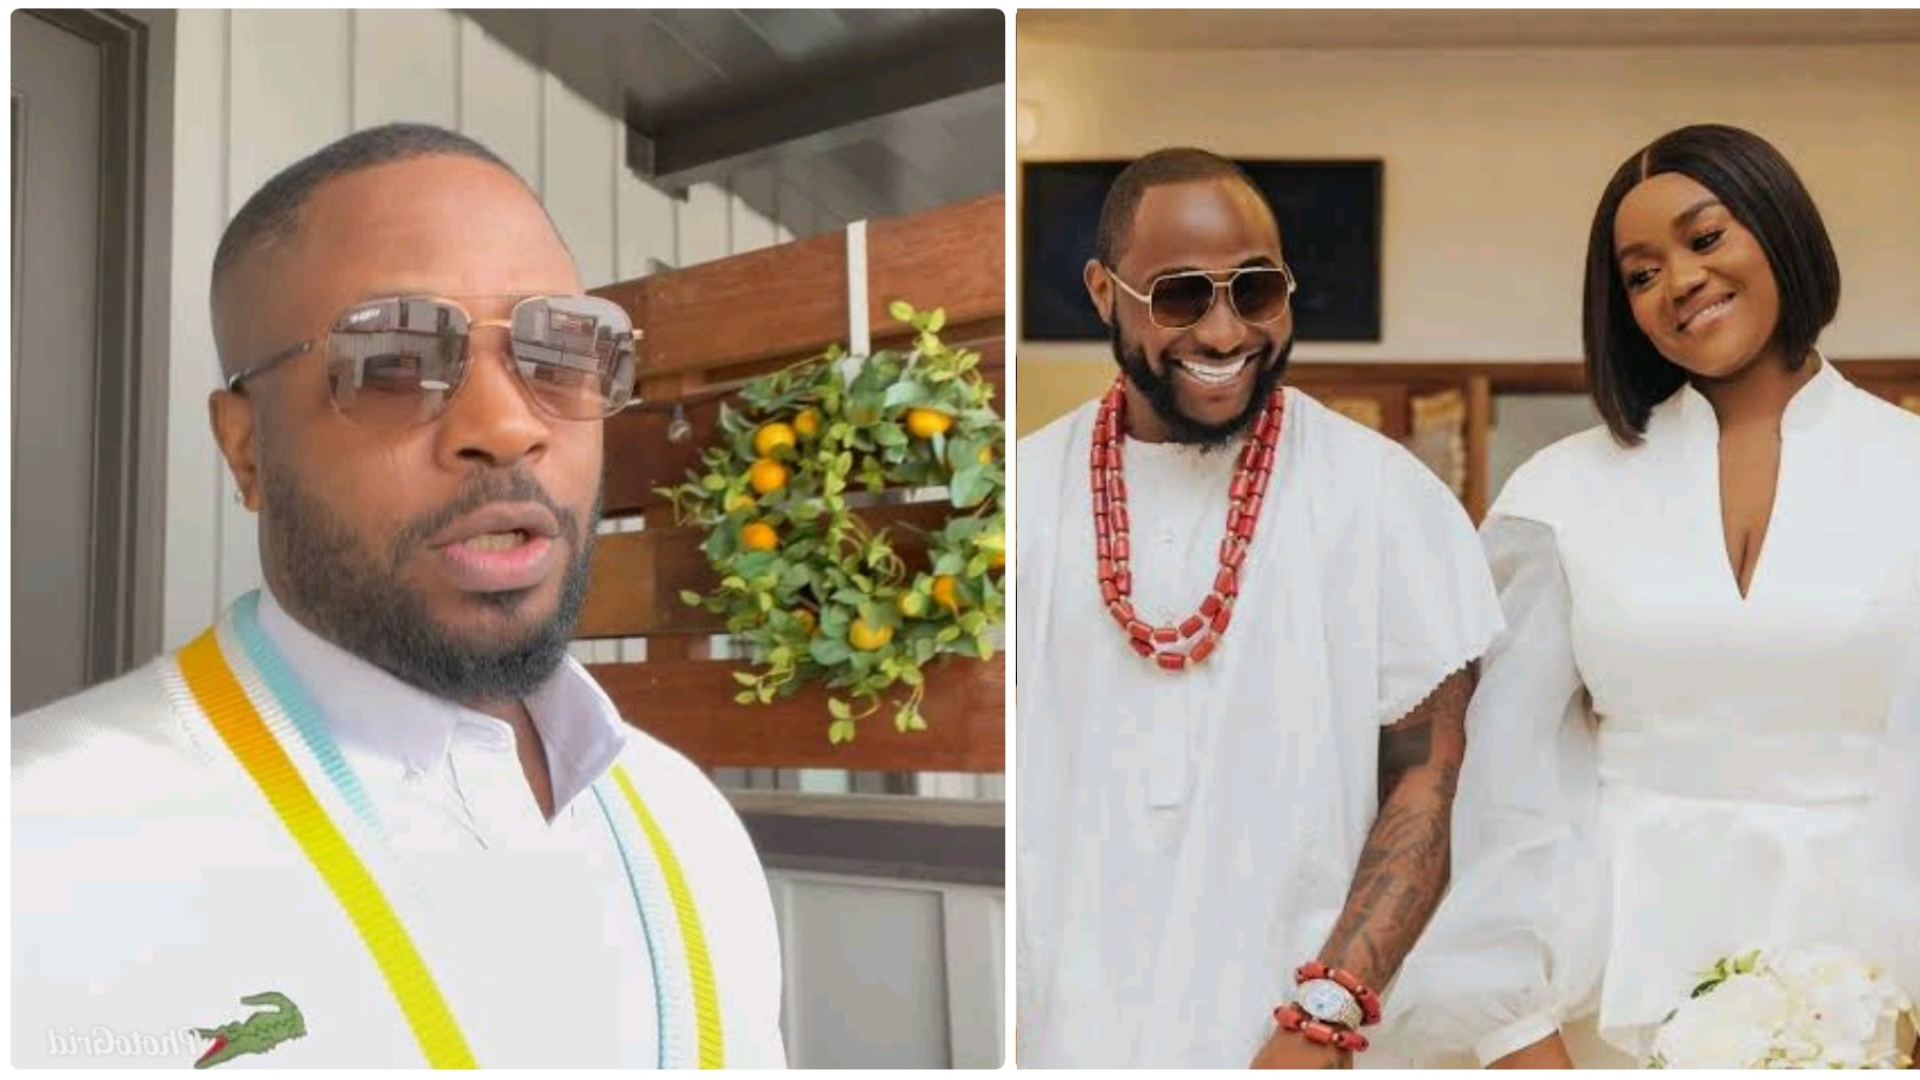 "He is a married man" - Tunde Ednut warns female fans chatting with him for Davido's contact